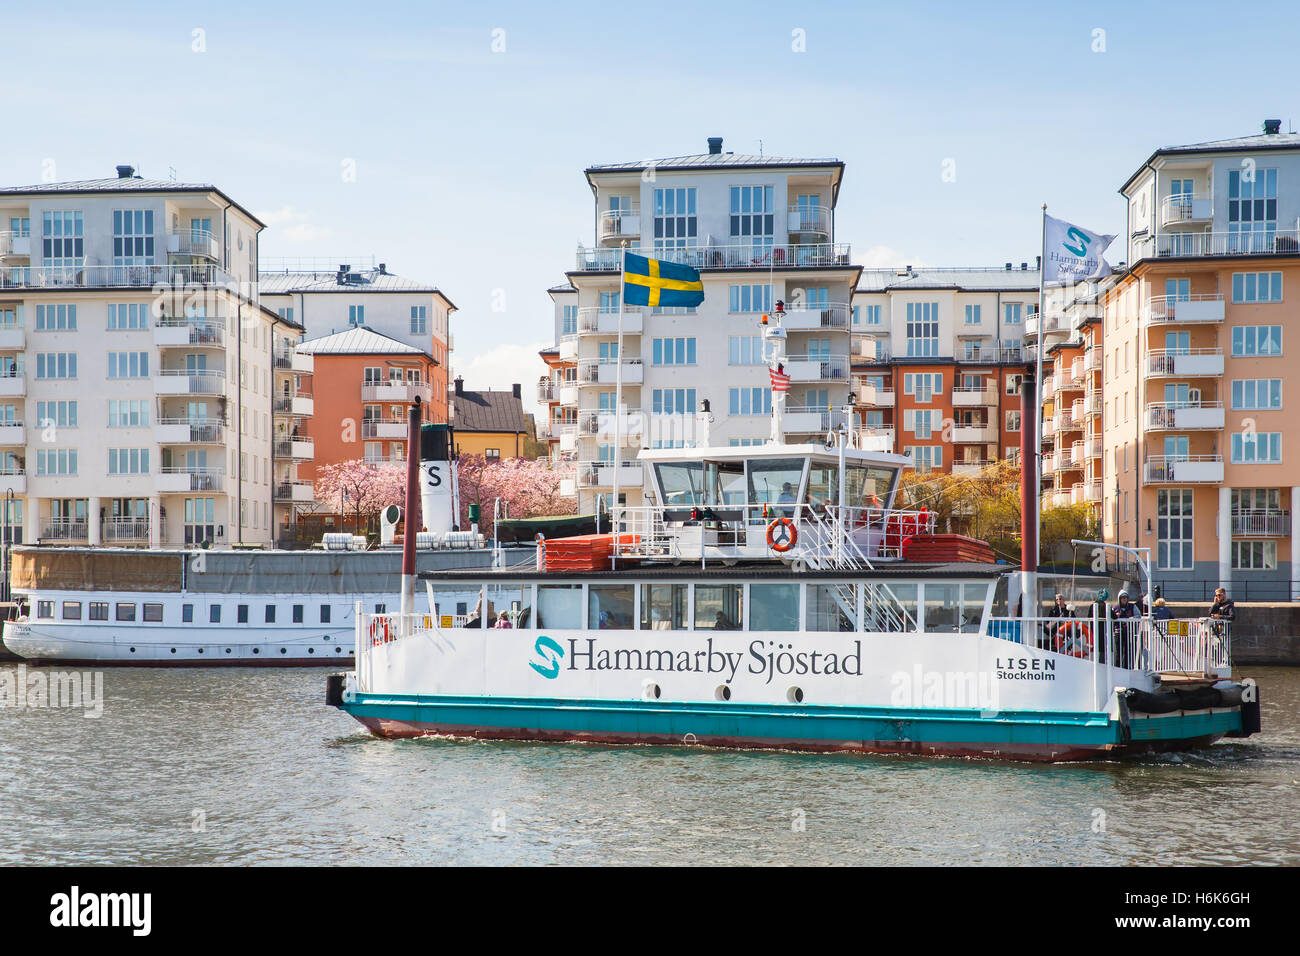 Stockholm, Sweden - May 3, 2016: Small passenger ferry Lisen with ordinary people on board, regular public transportation Stock Photo